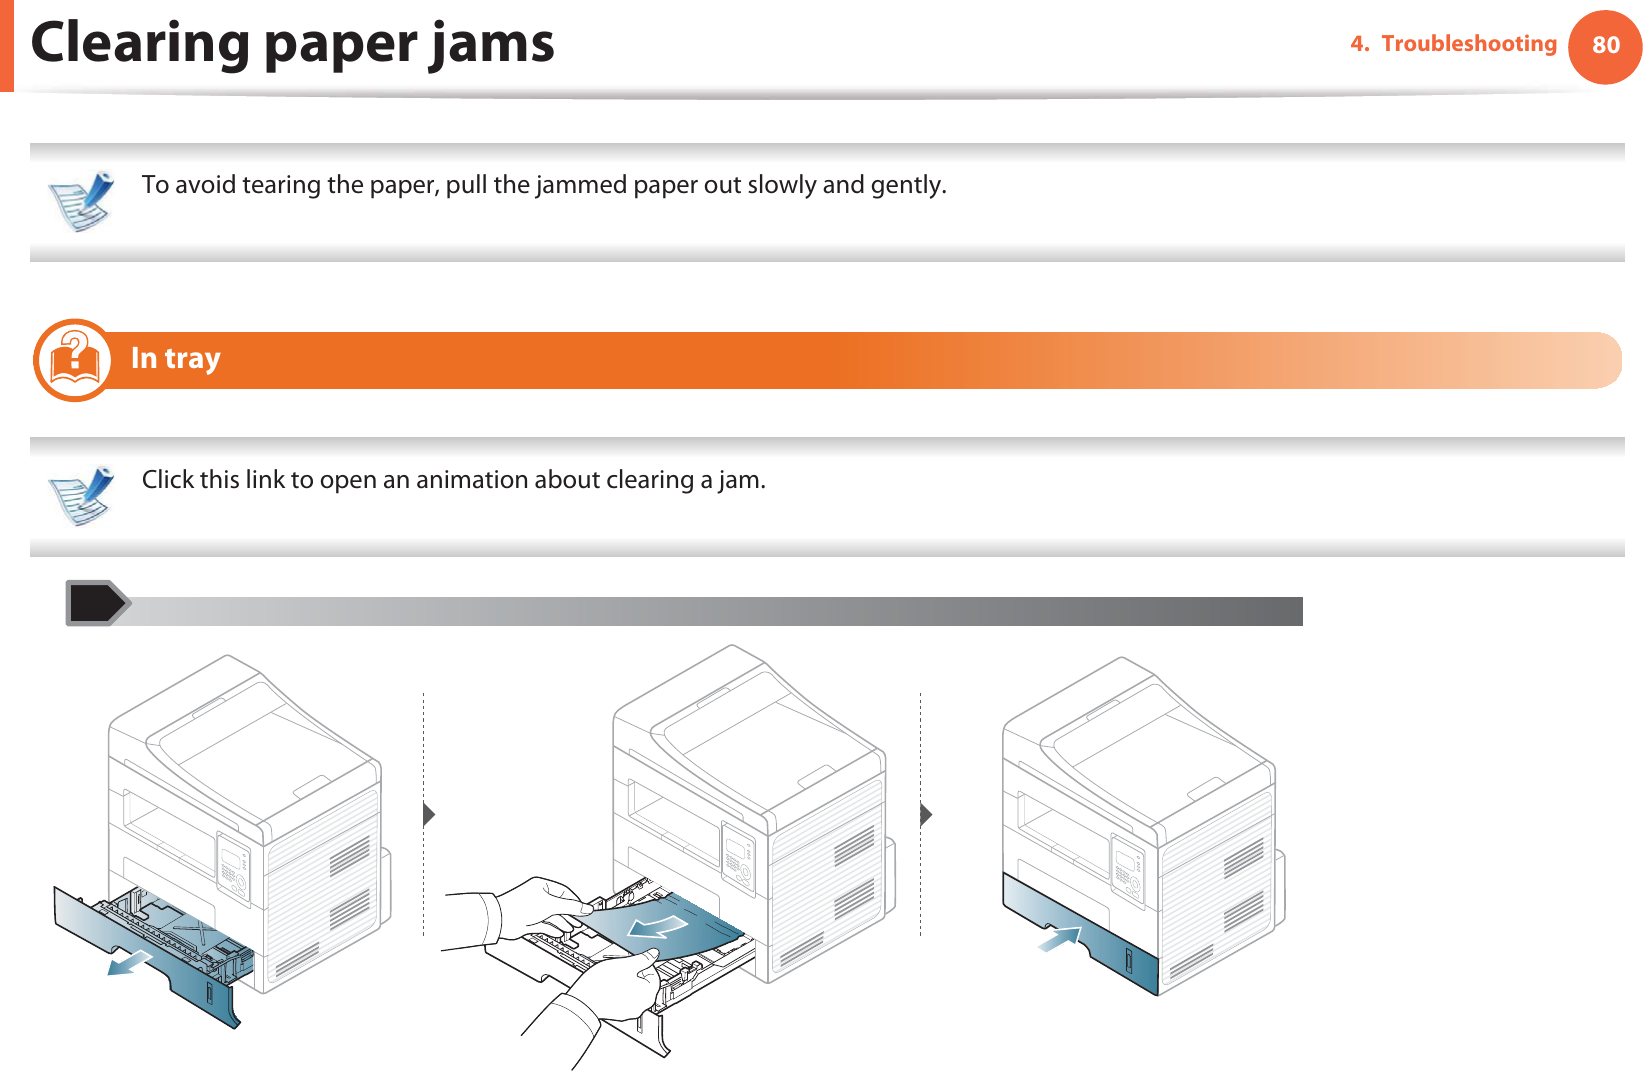 804. TroubleshootingClearing paper jams To avoid tearing the paper, pull the jammed paper out slowly and gently.  4 In tray Click this link to open an animation about clearing a jam. 